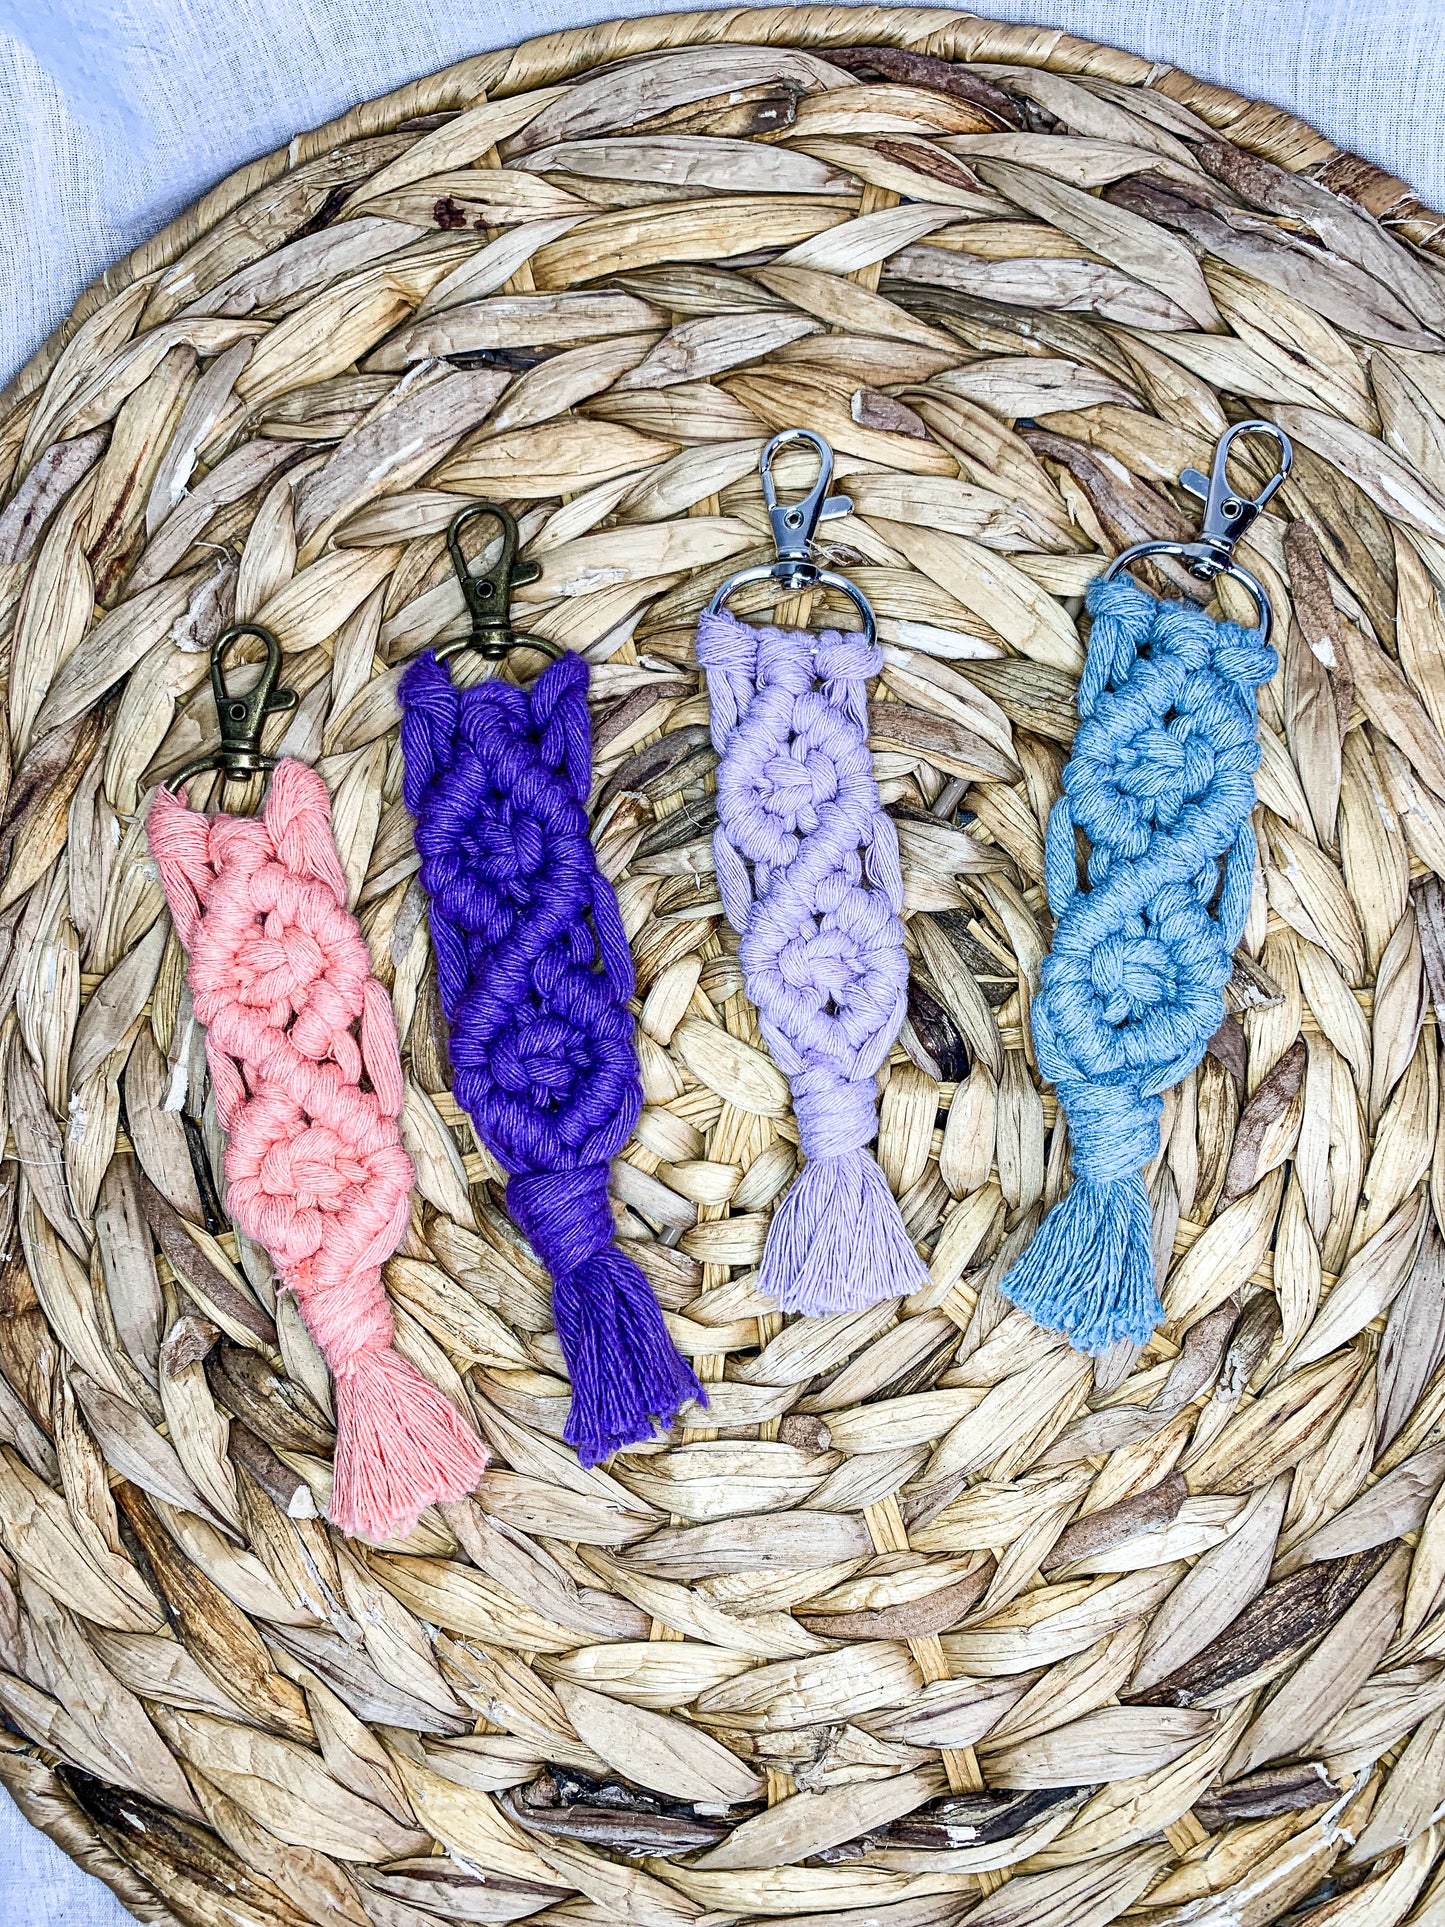 Keychains for Women